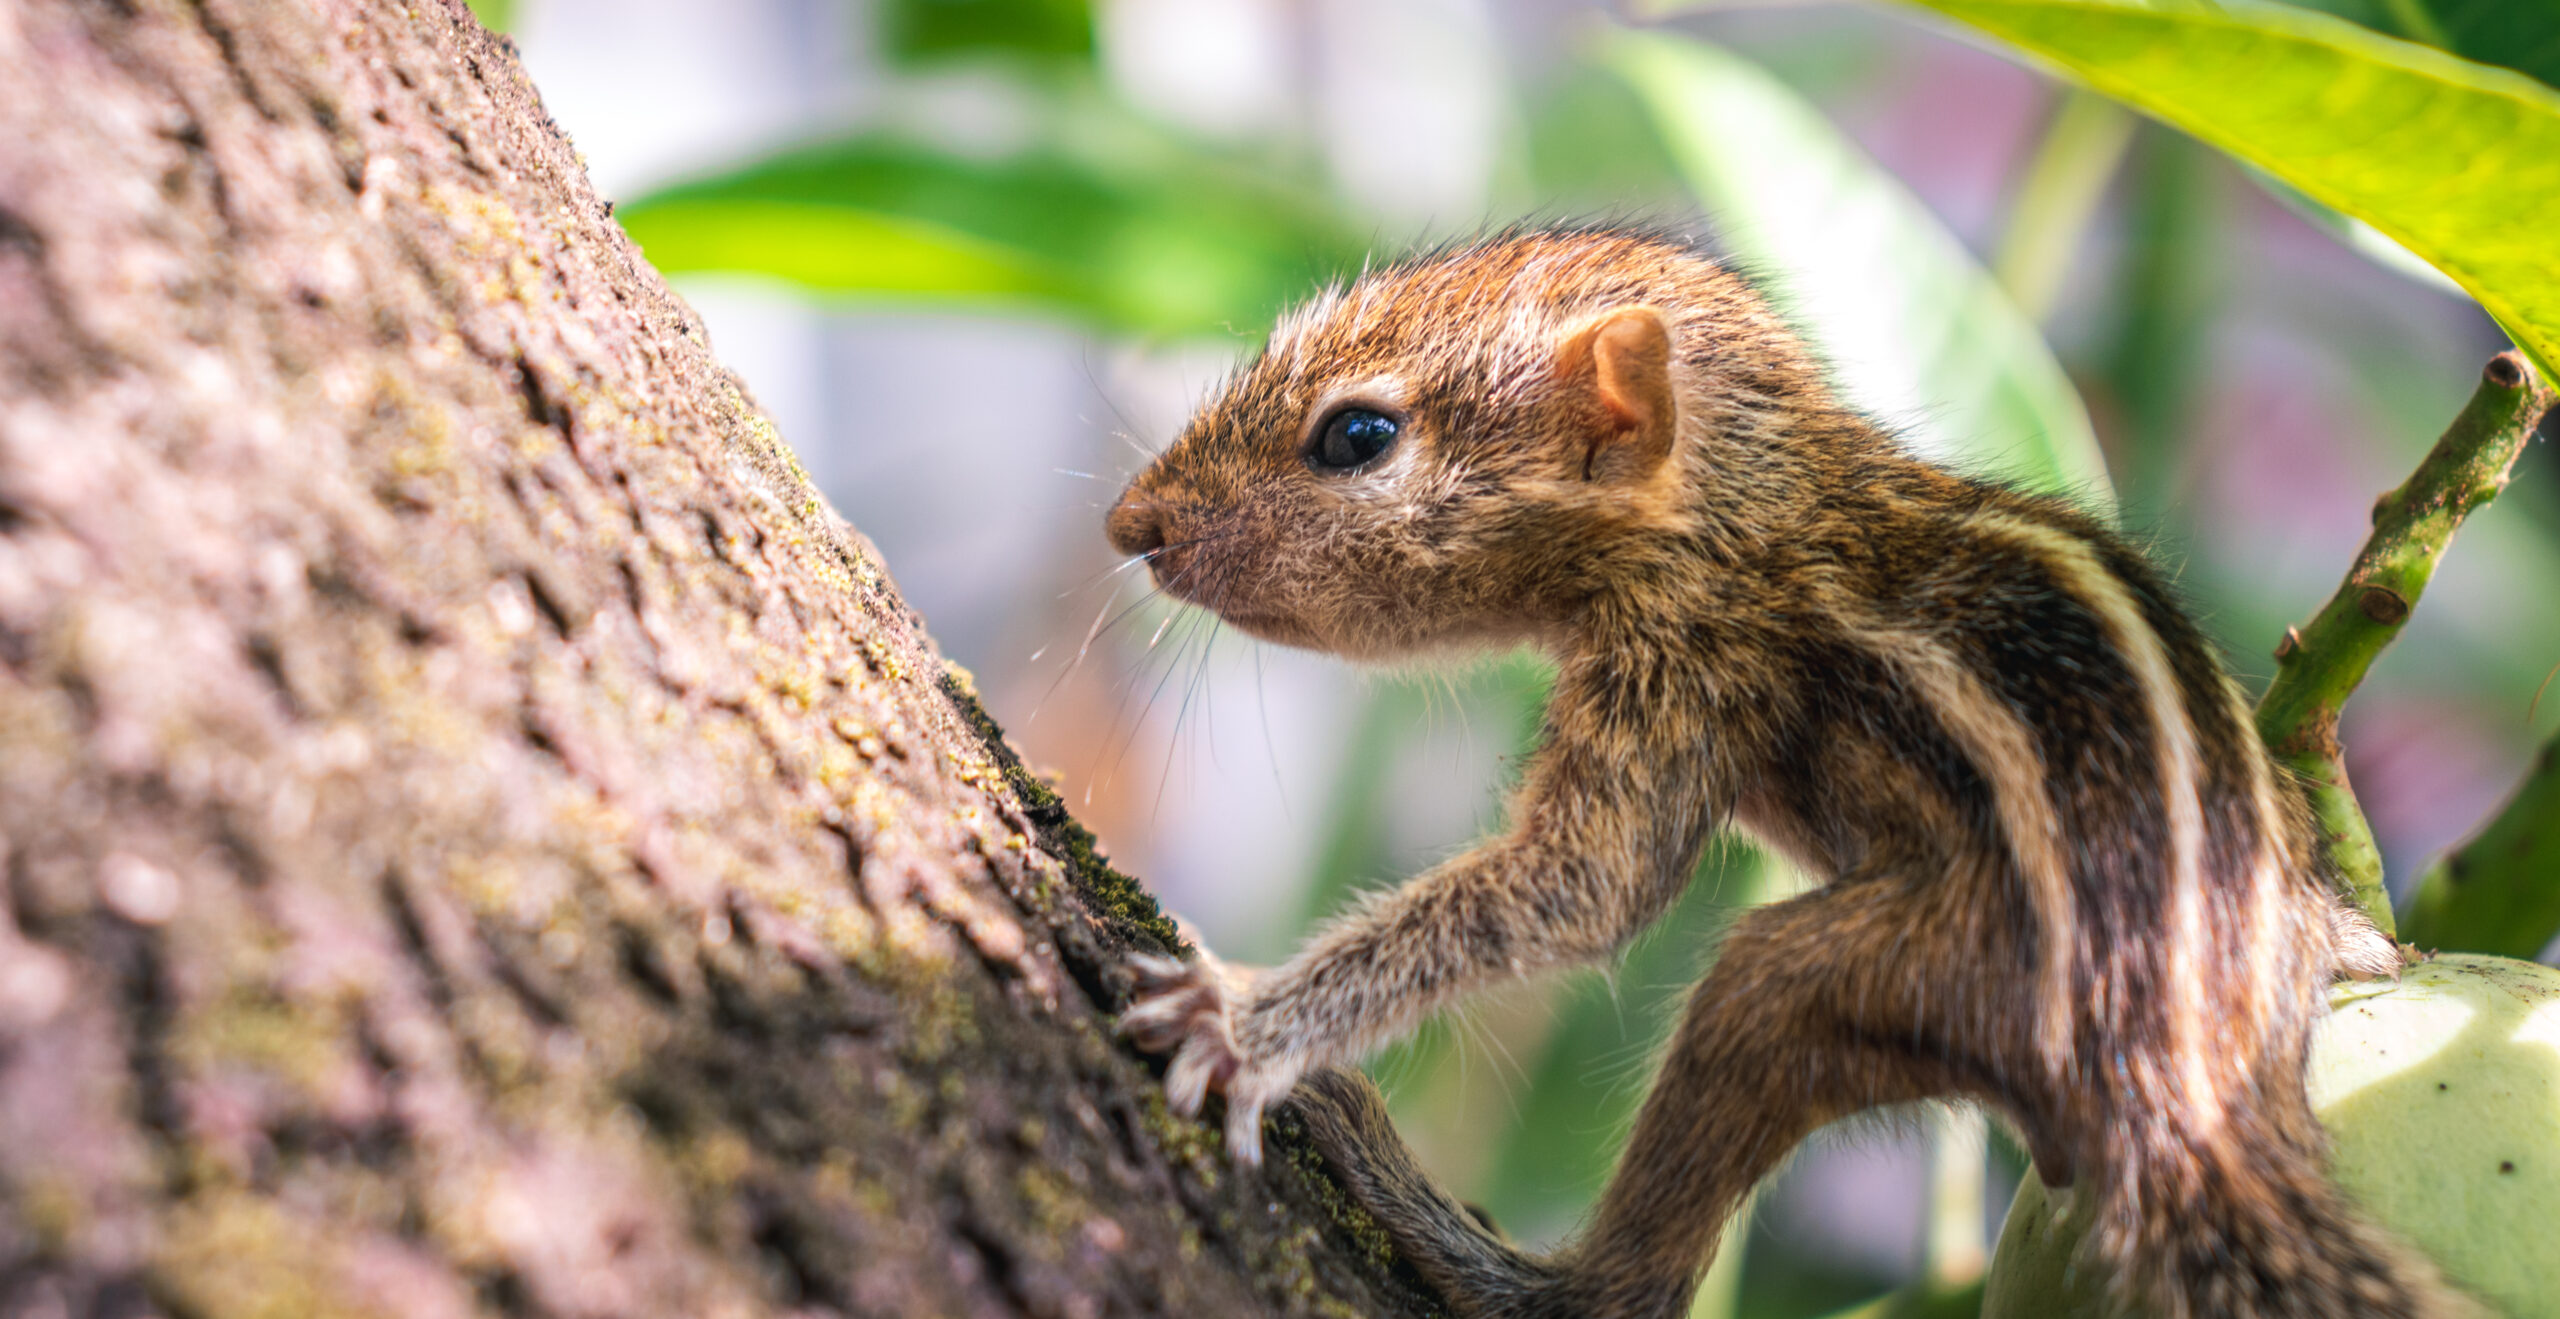 Cute and adorable small-boned newly born squirrel baby struggling hold on to a big mango tree, three stripes on the back, and furry skin. Close up wild animal portraiture photographs.